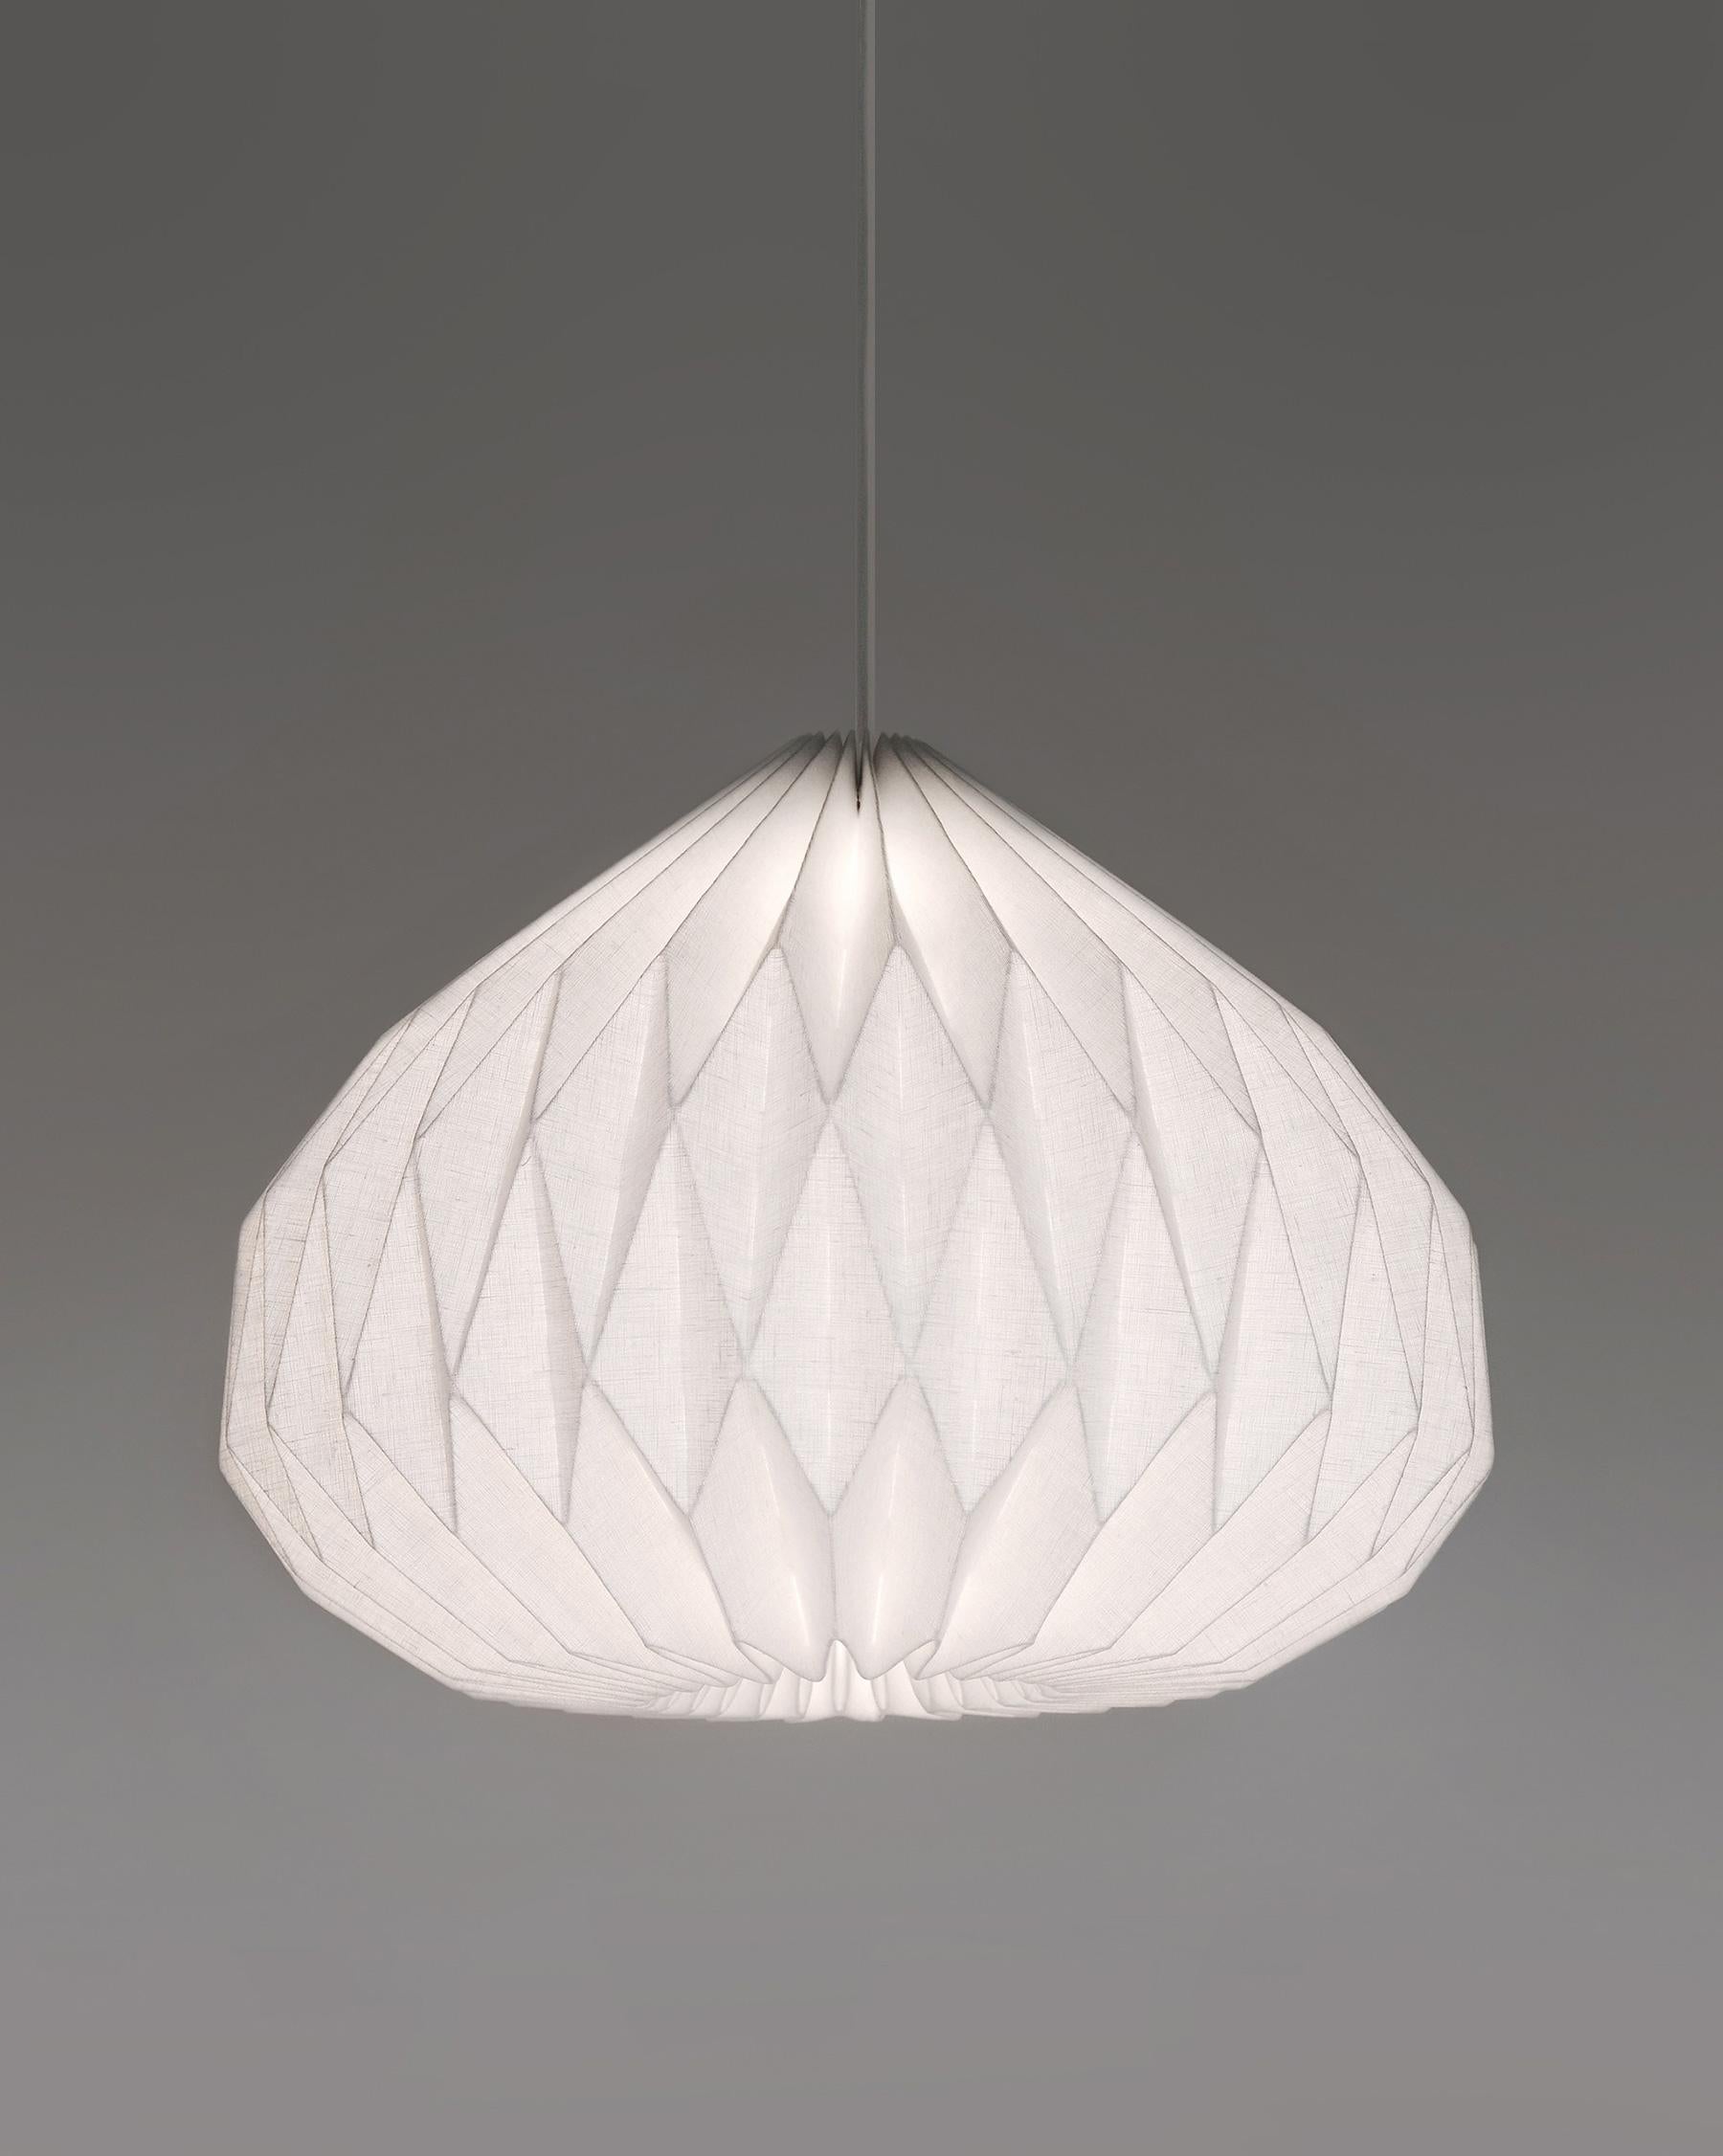 Hand-Crafted Modern Pendant Lamp - Unique Linen Pendant Lampshade by La Loupe For Sale